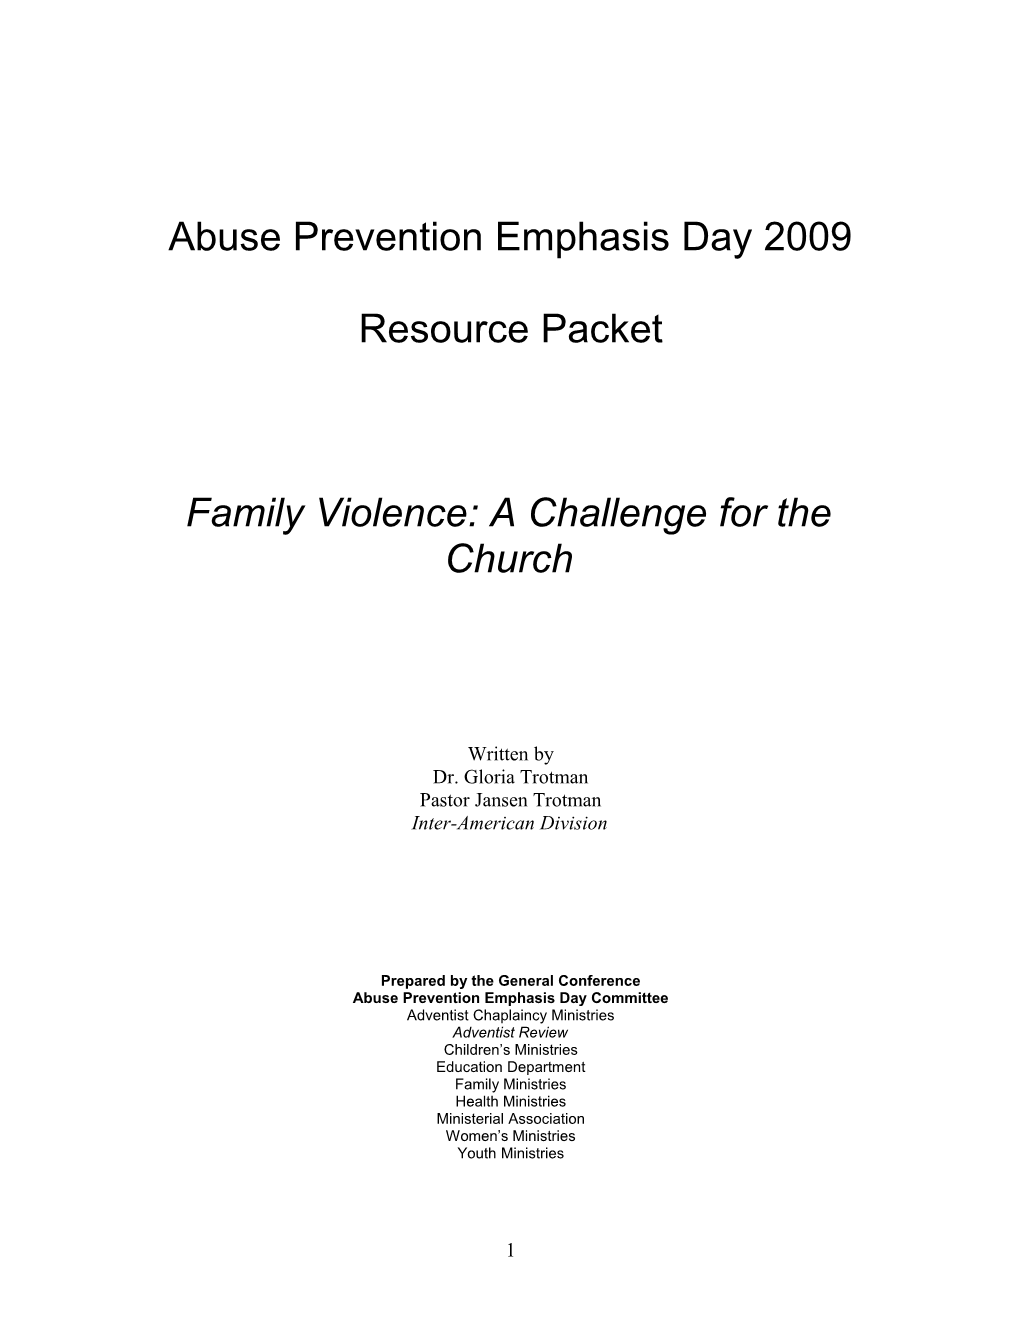 Abuse Prevention Emphasis Packet